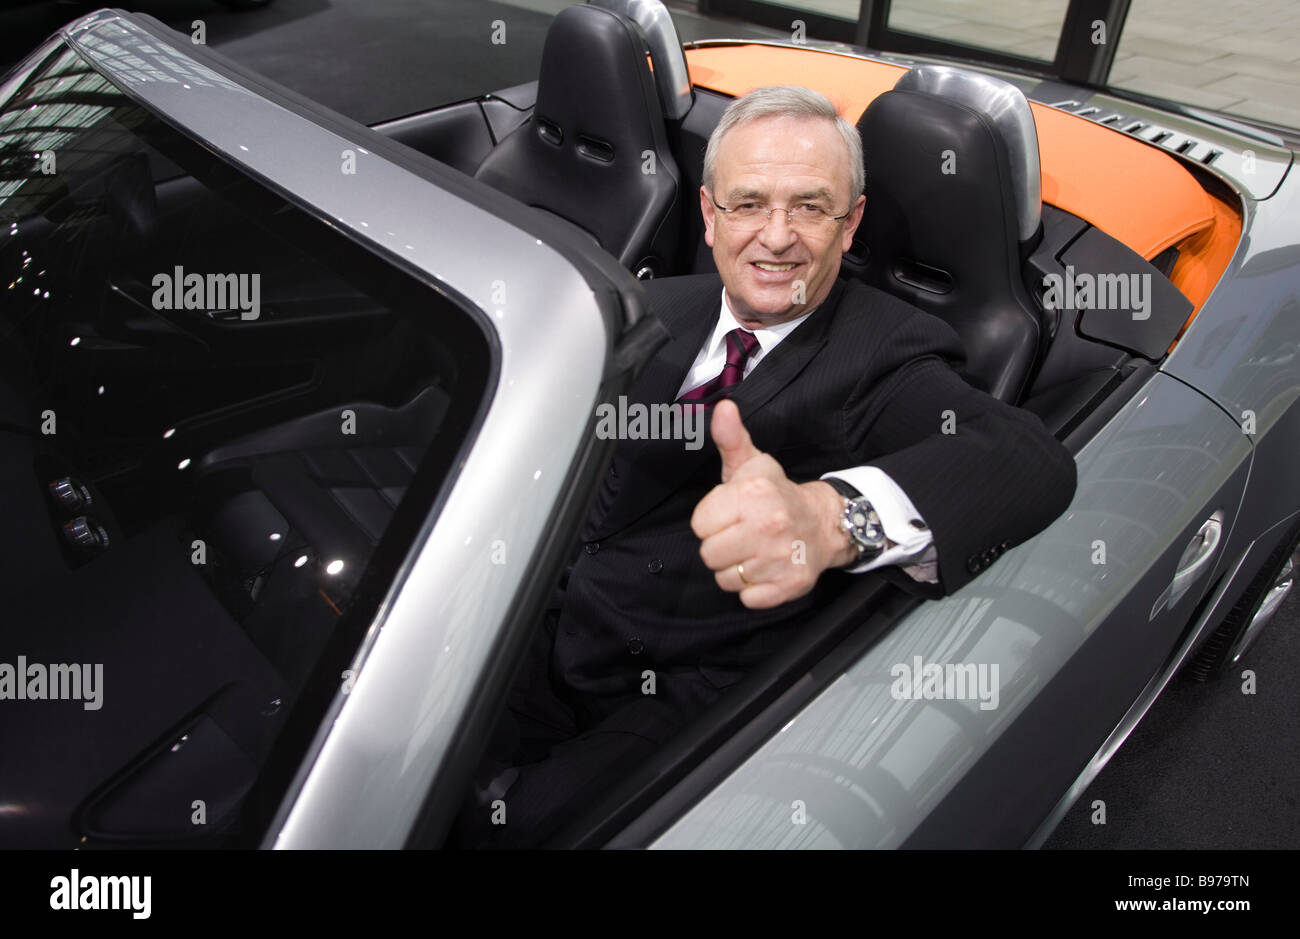 Prof Dr Martin Winterkorn chief executive officer of the Volkswagen AG during annual press conference 2009 Stock Photo